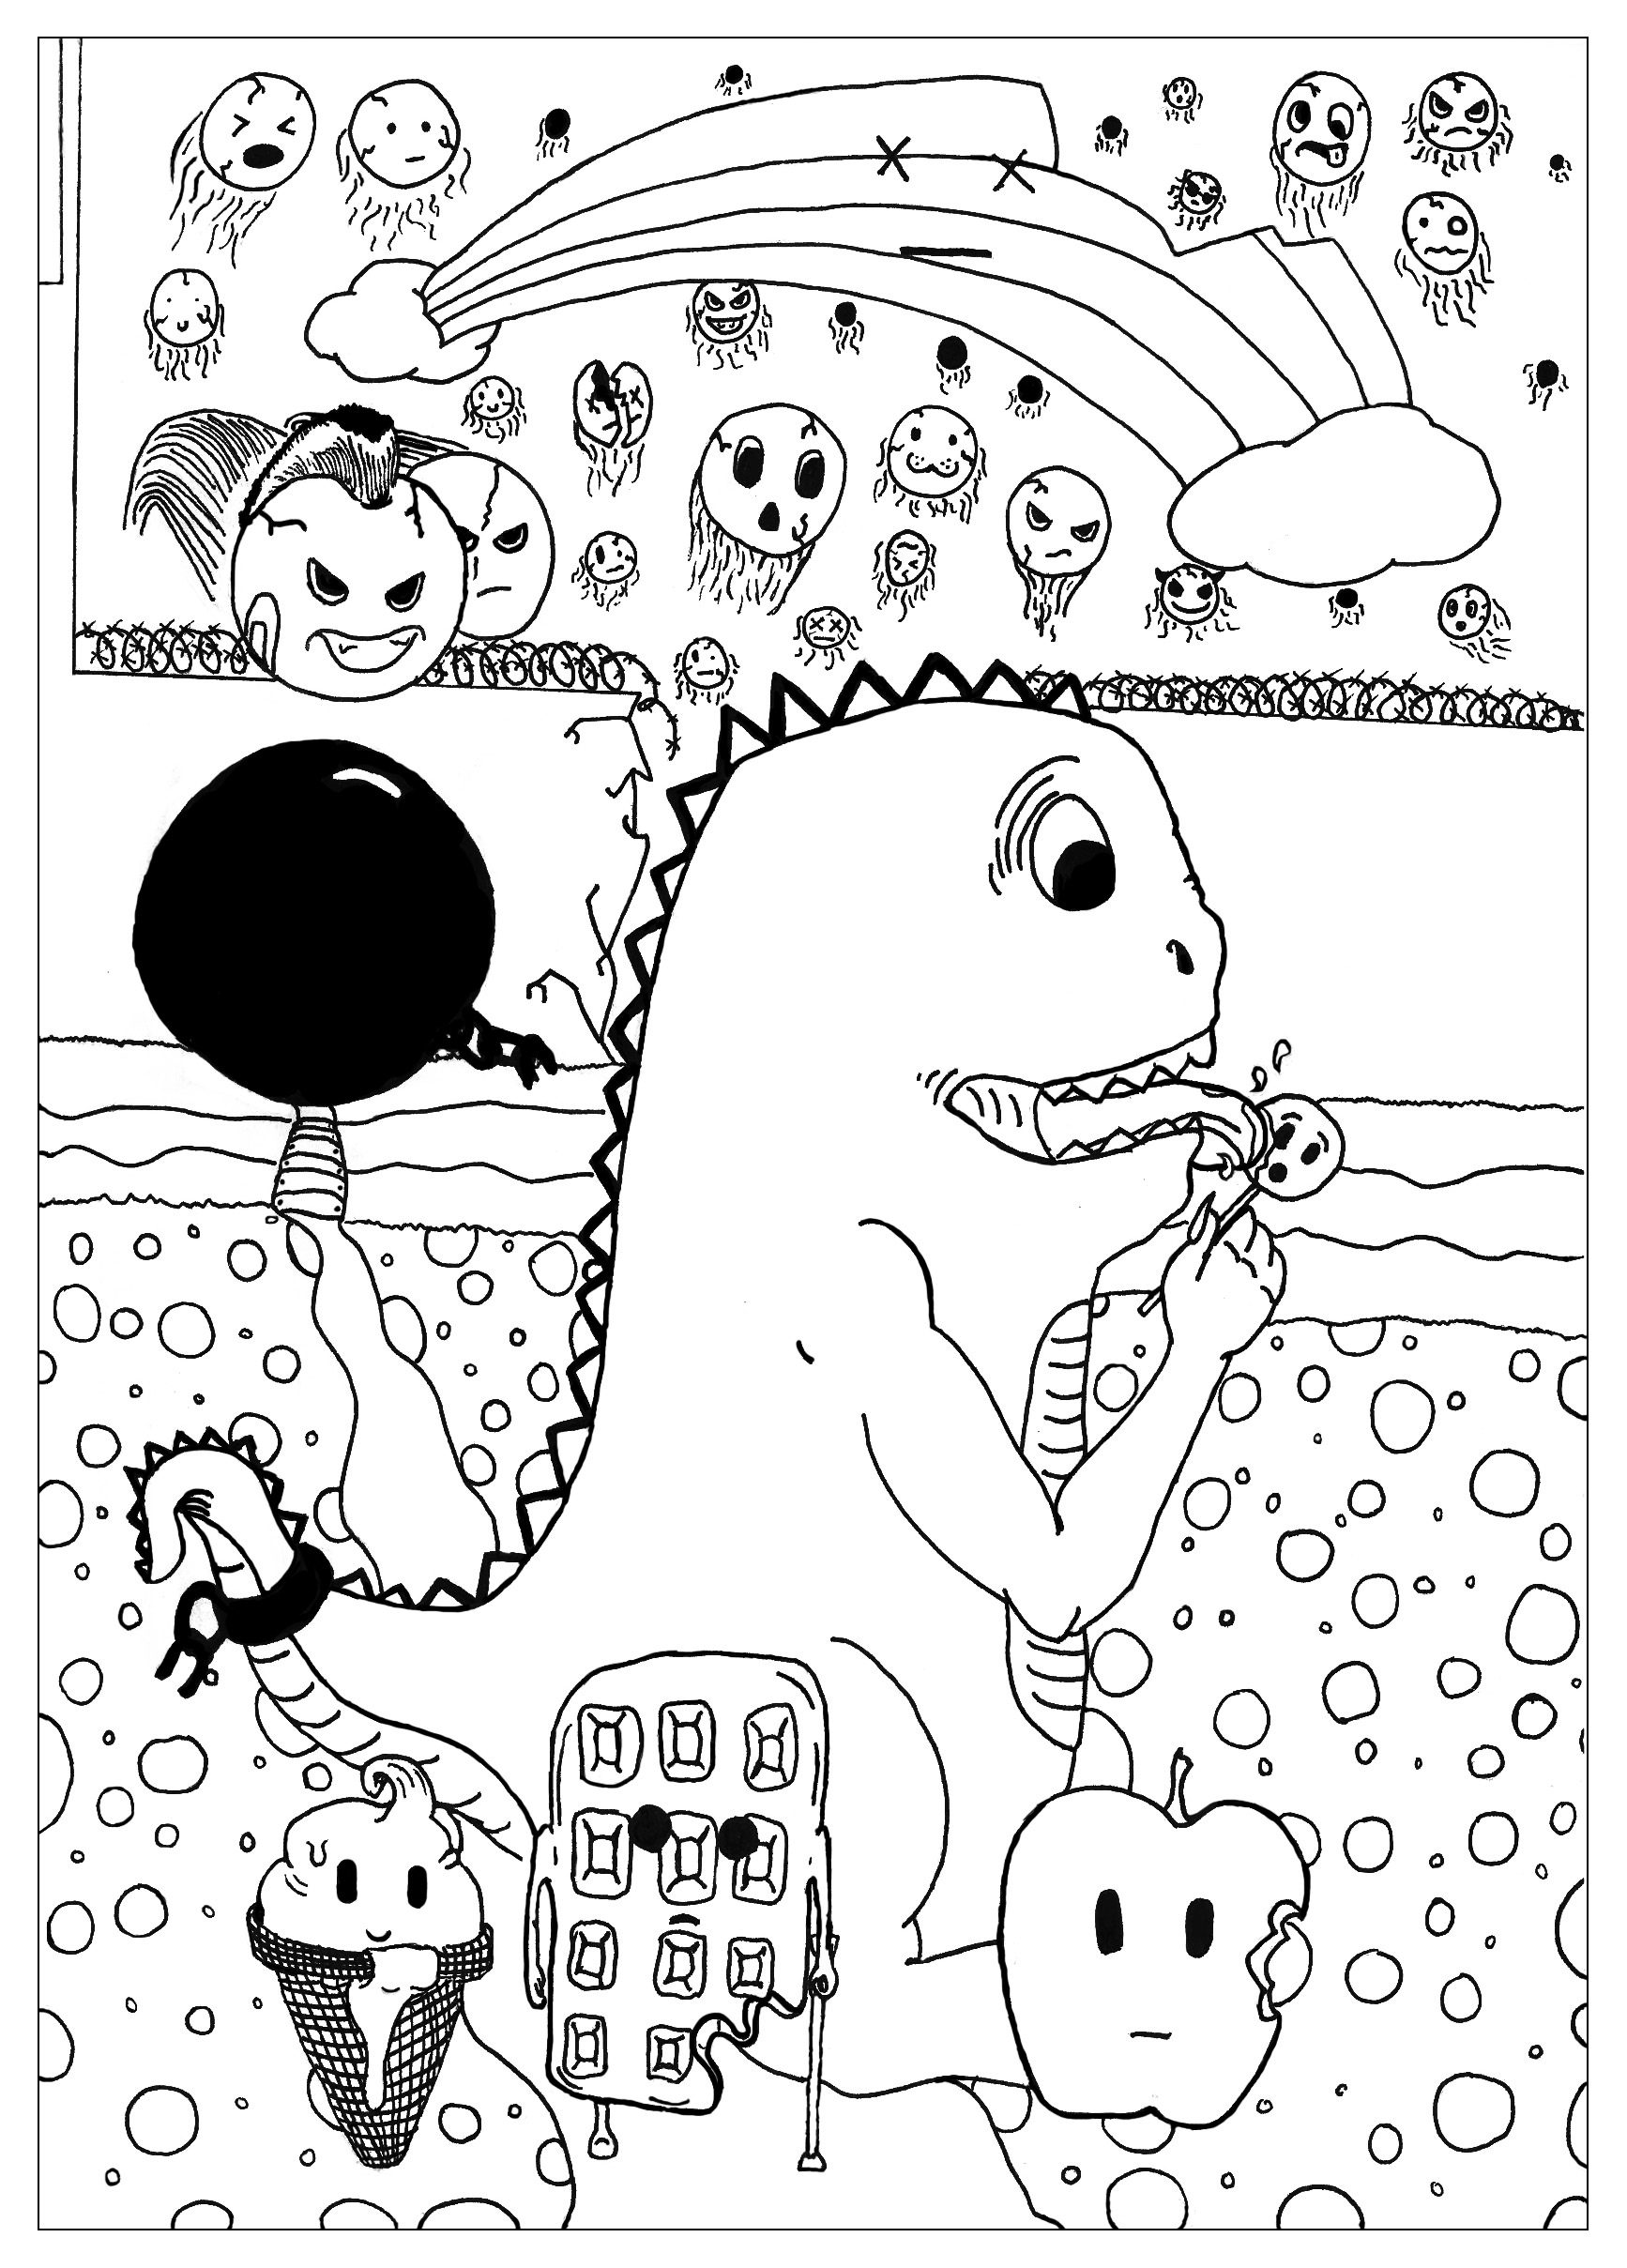 Doodle Art coloring page to download